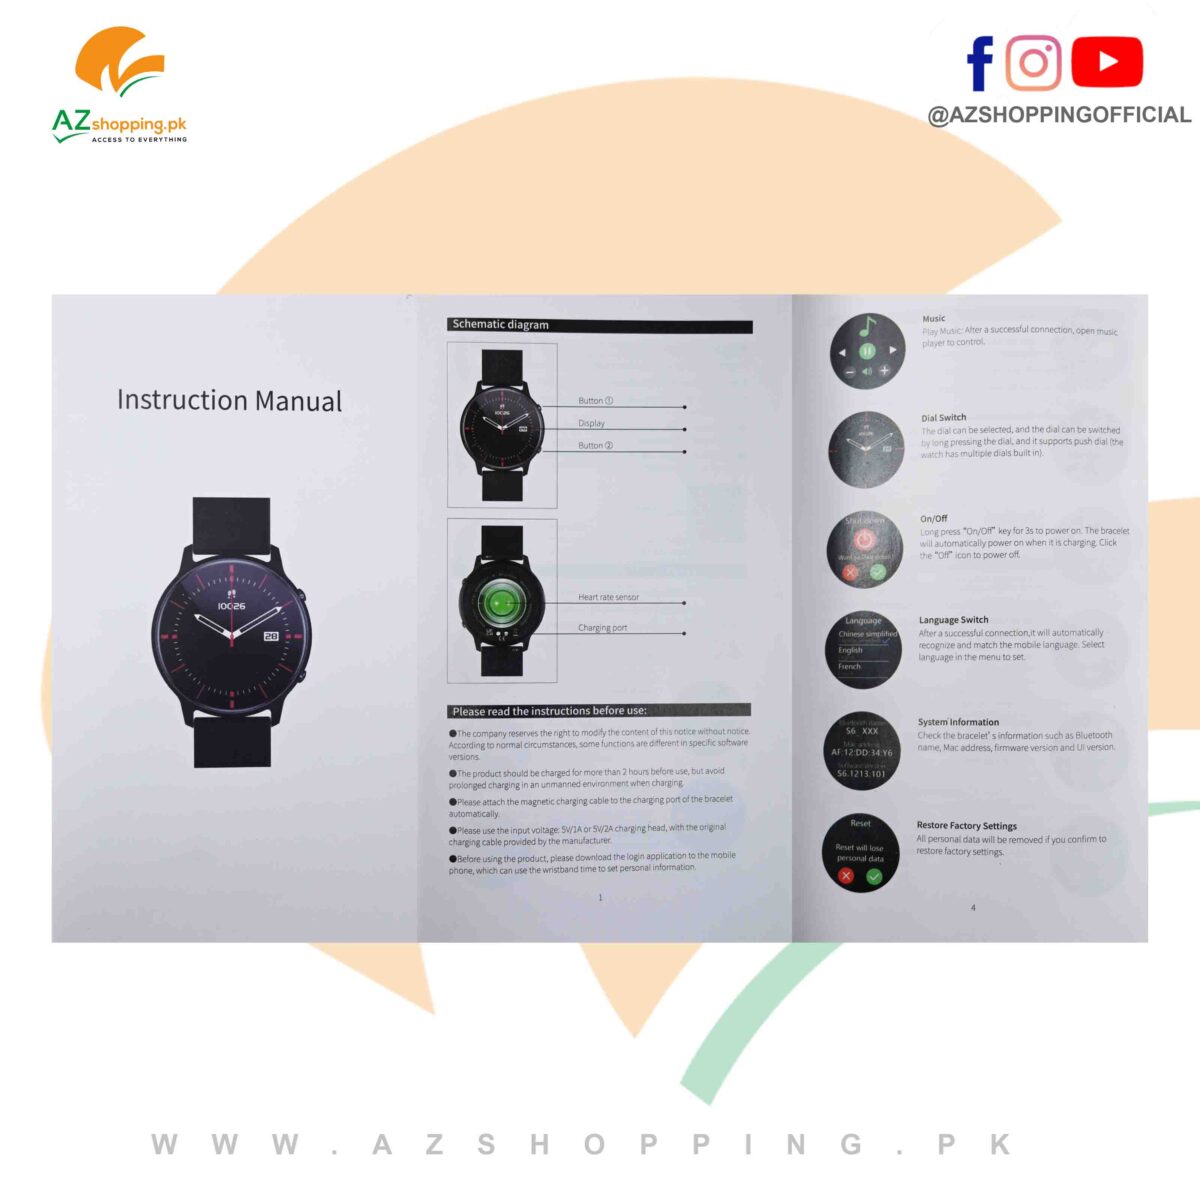 Smart Watch with Band & Magnetic Charger